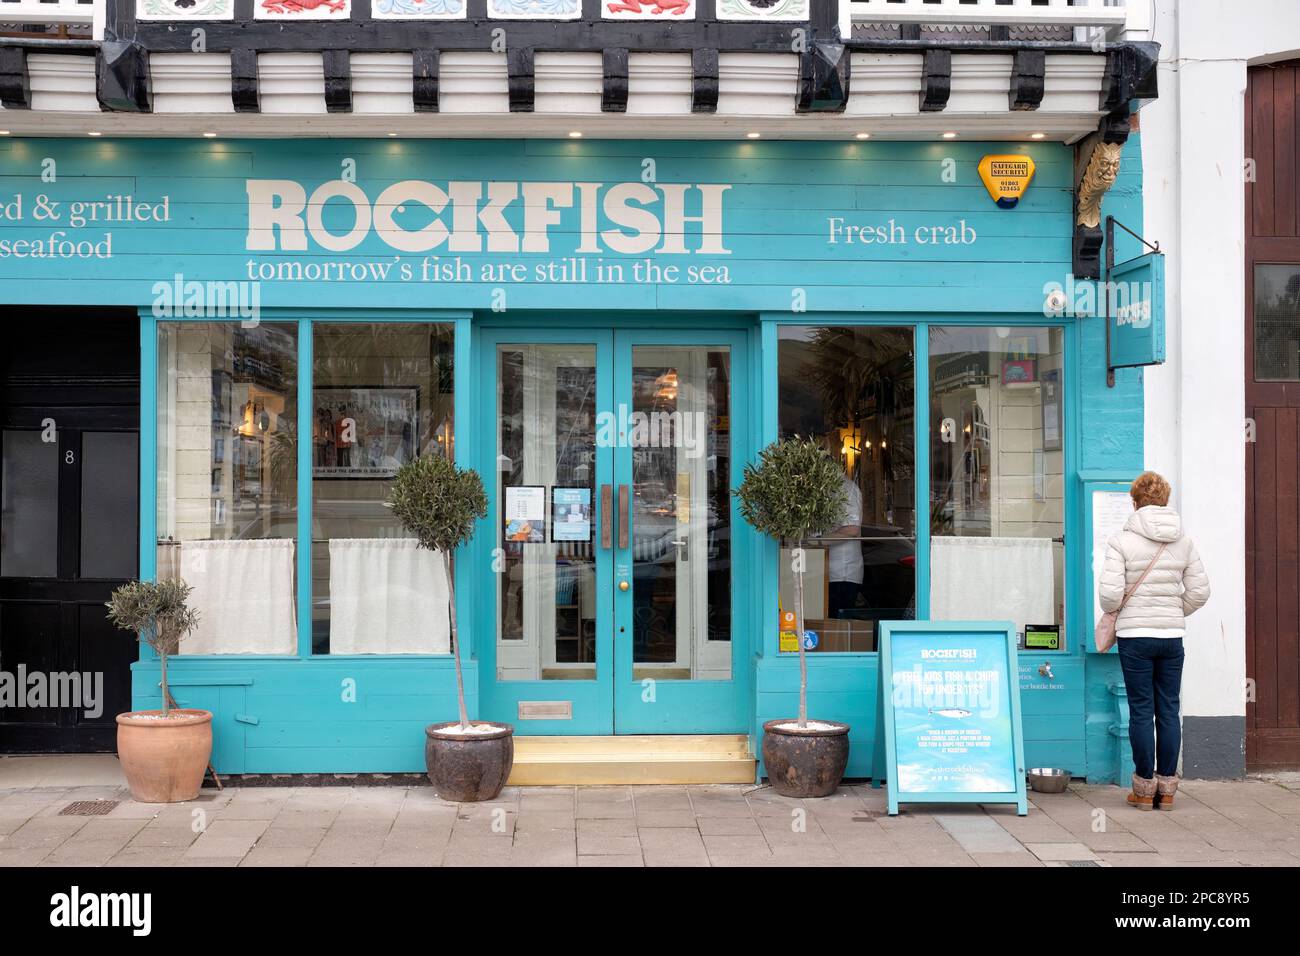 The Rockfish seafood restaurant in Dartmouth, Devon, UK. The restaurant prides itself in providing the freshest of seafood bought the day its prepared Stock Photo